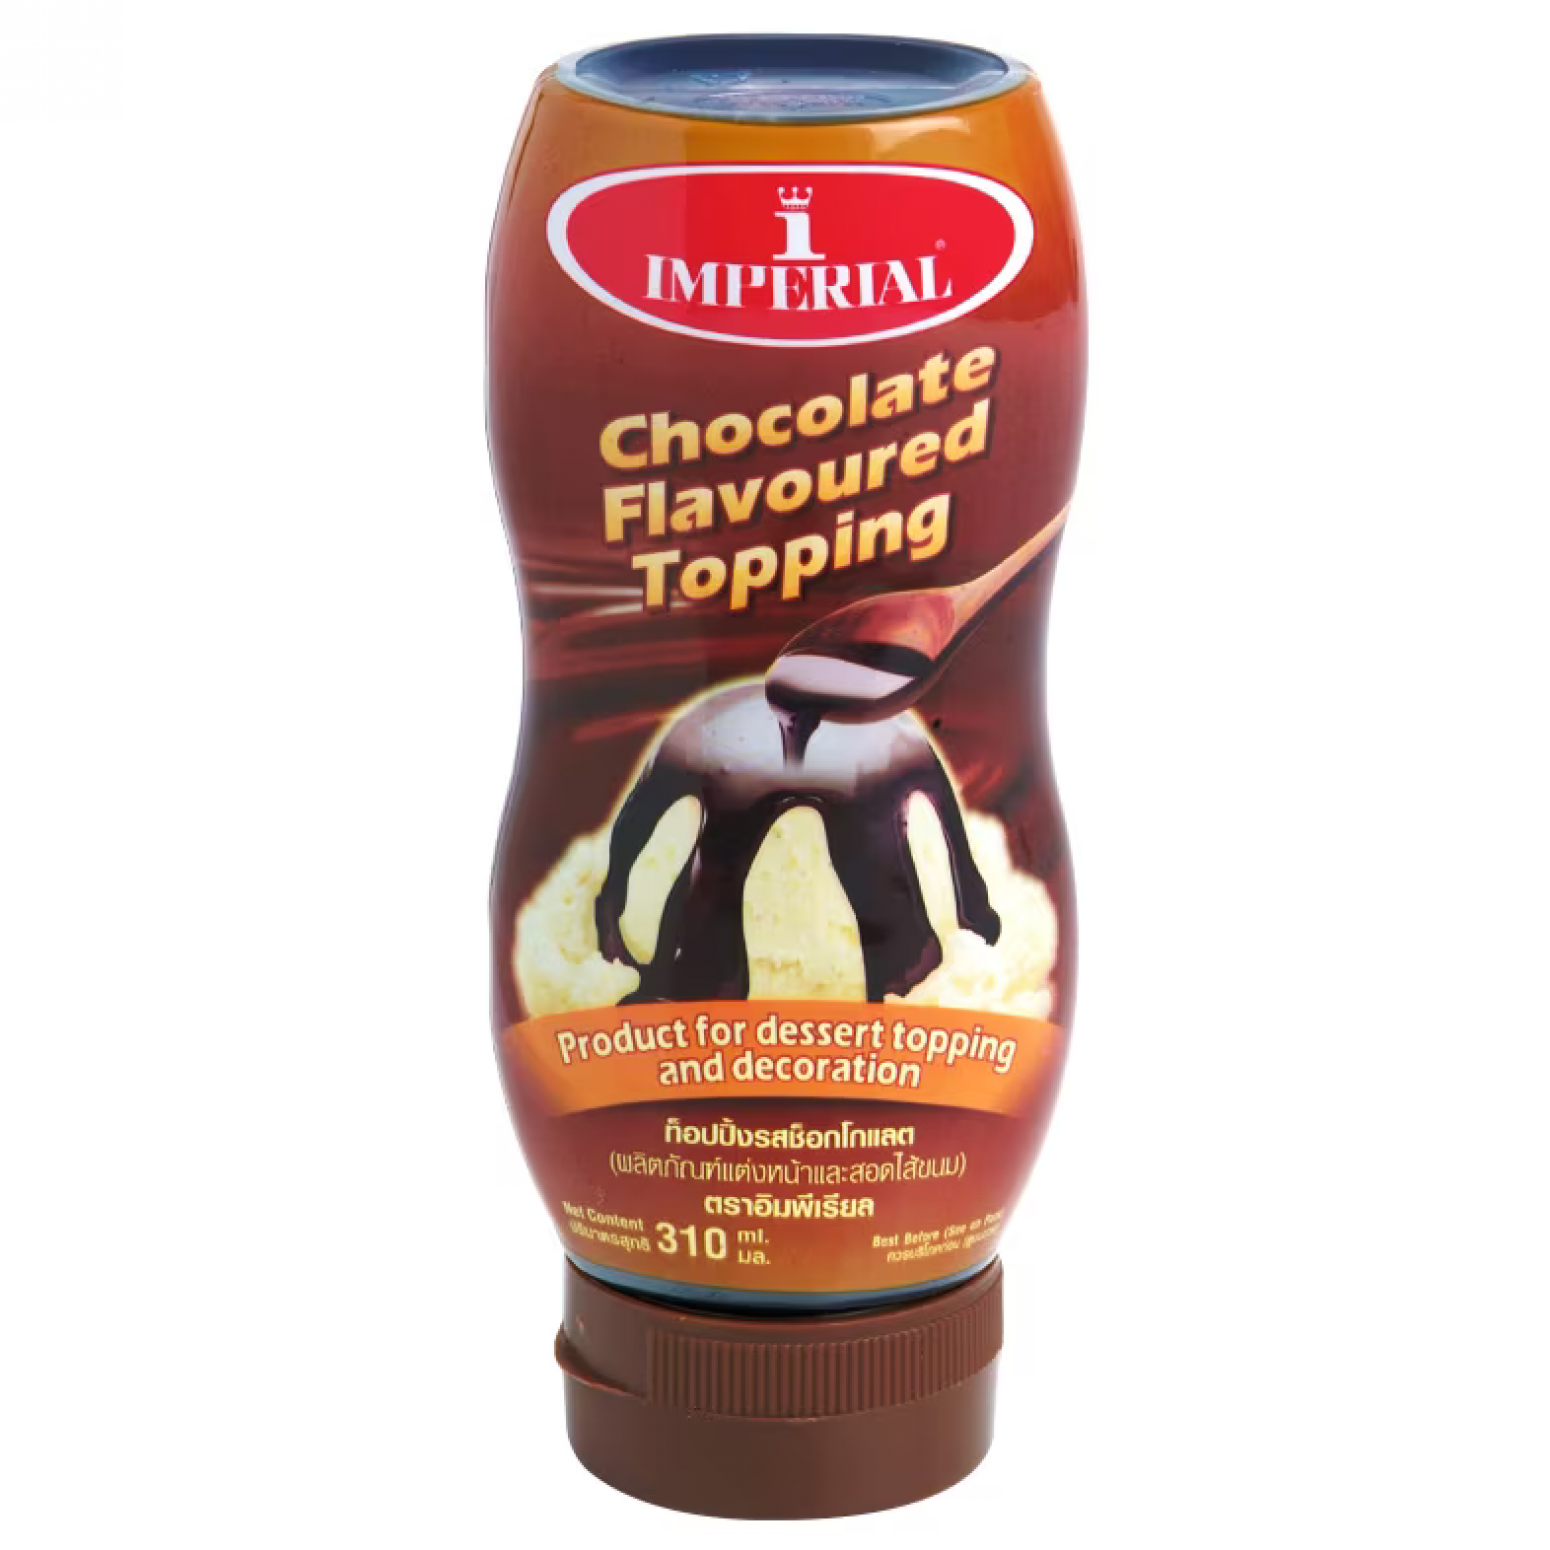 Imperial Chocolate Flavoured Topping 310ml.